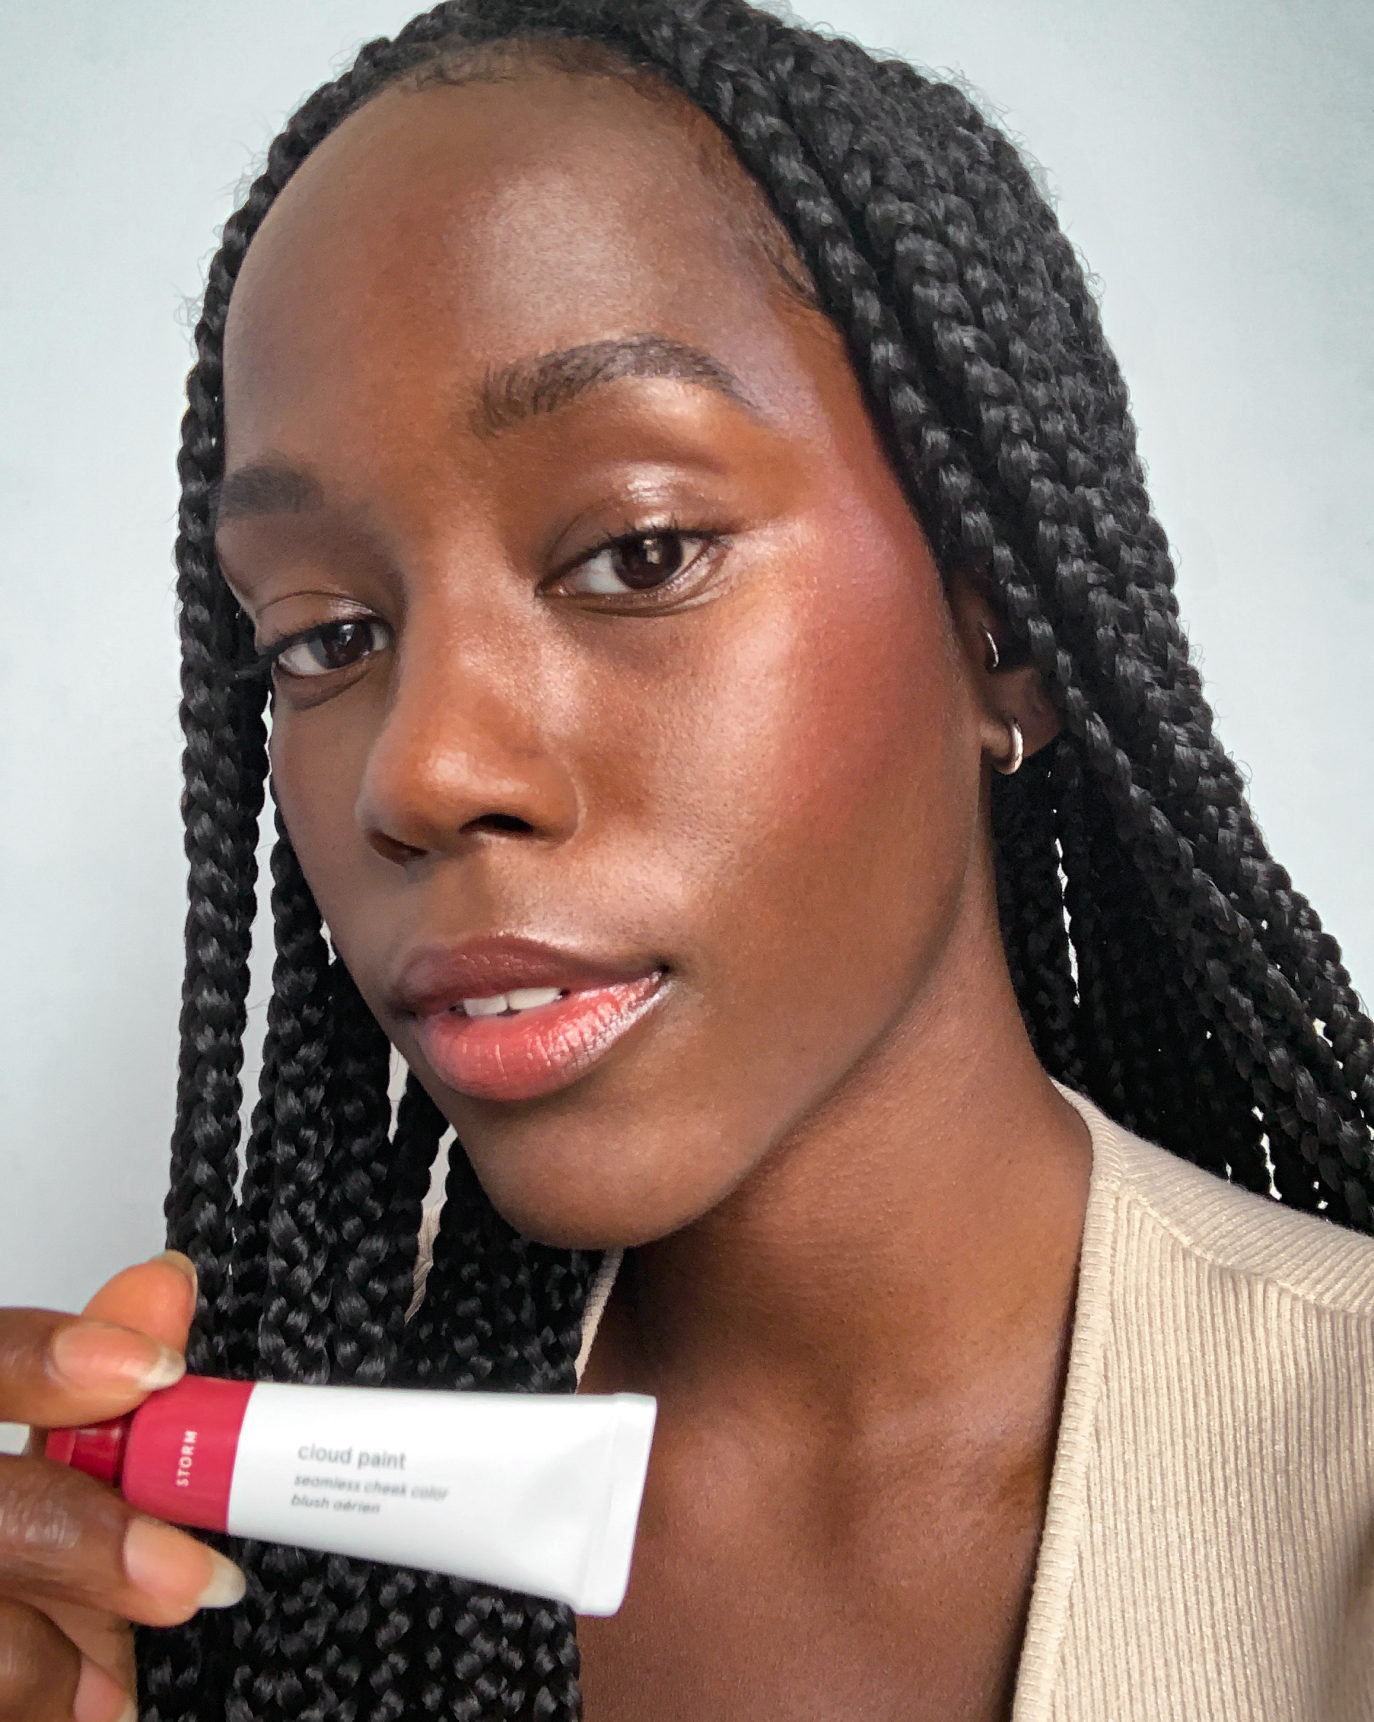 Get a Natural Flush with Glossier Cloud Paint in Beam 0.33 fl oz / 10 ml